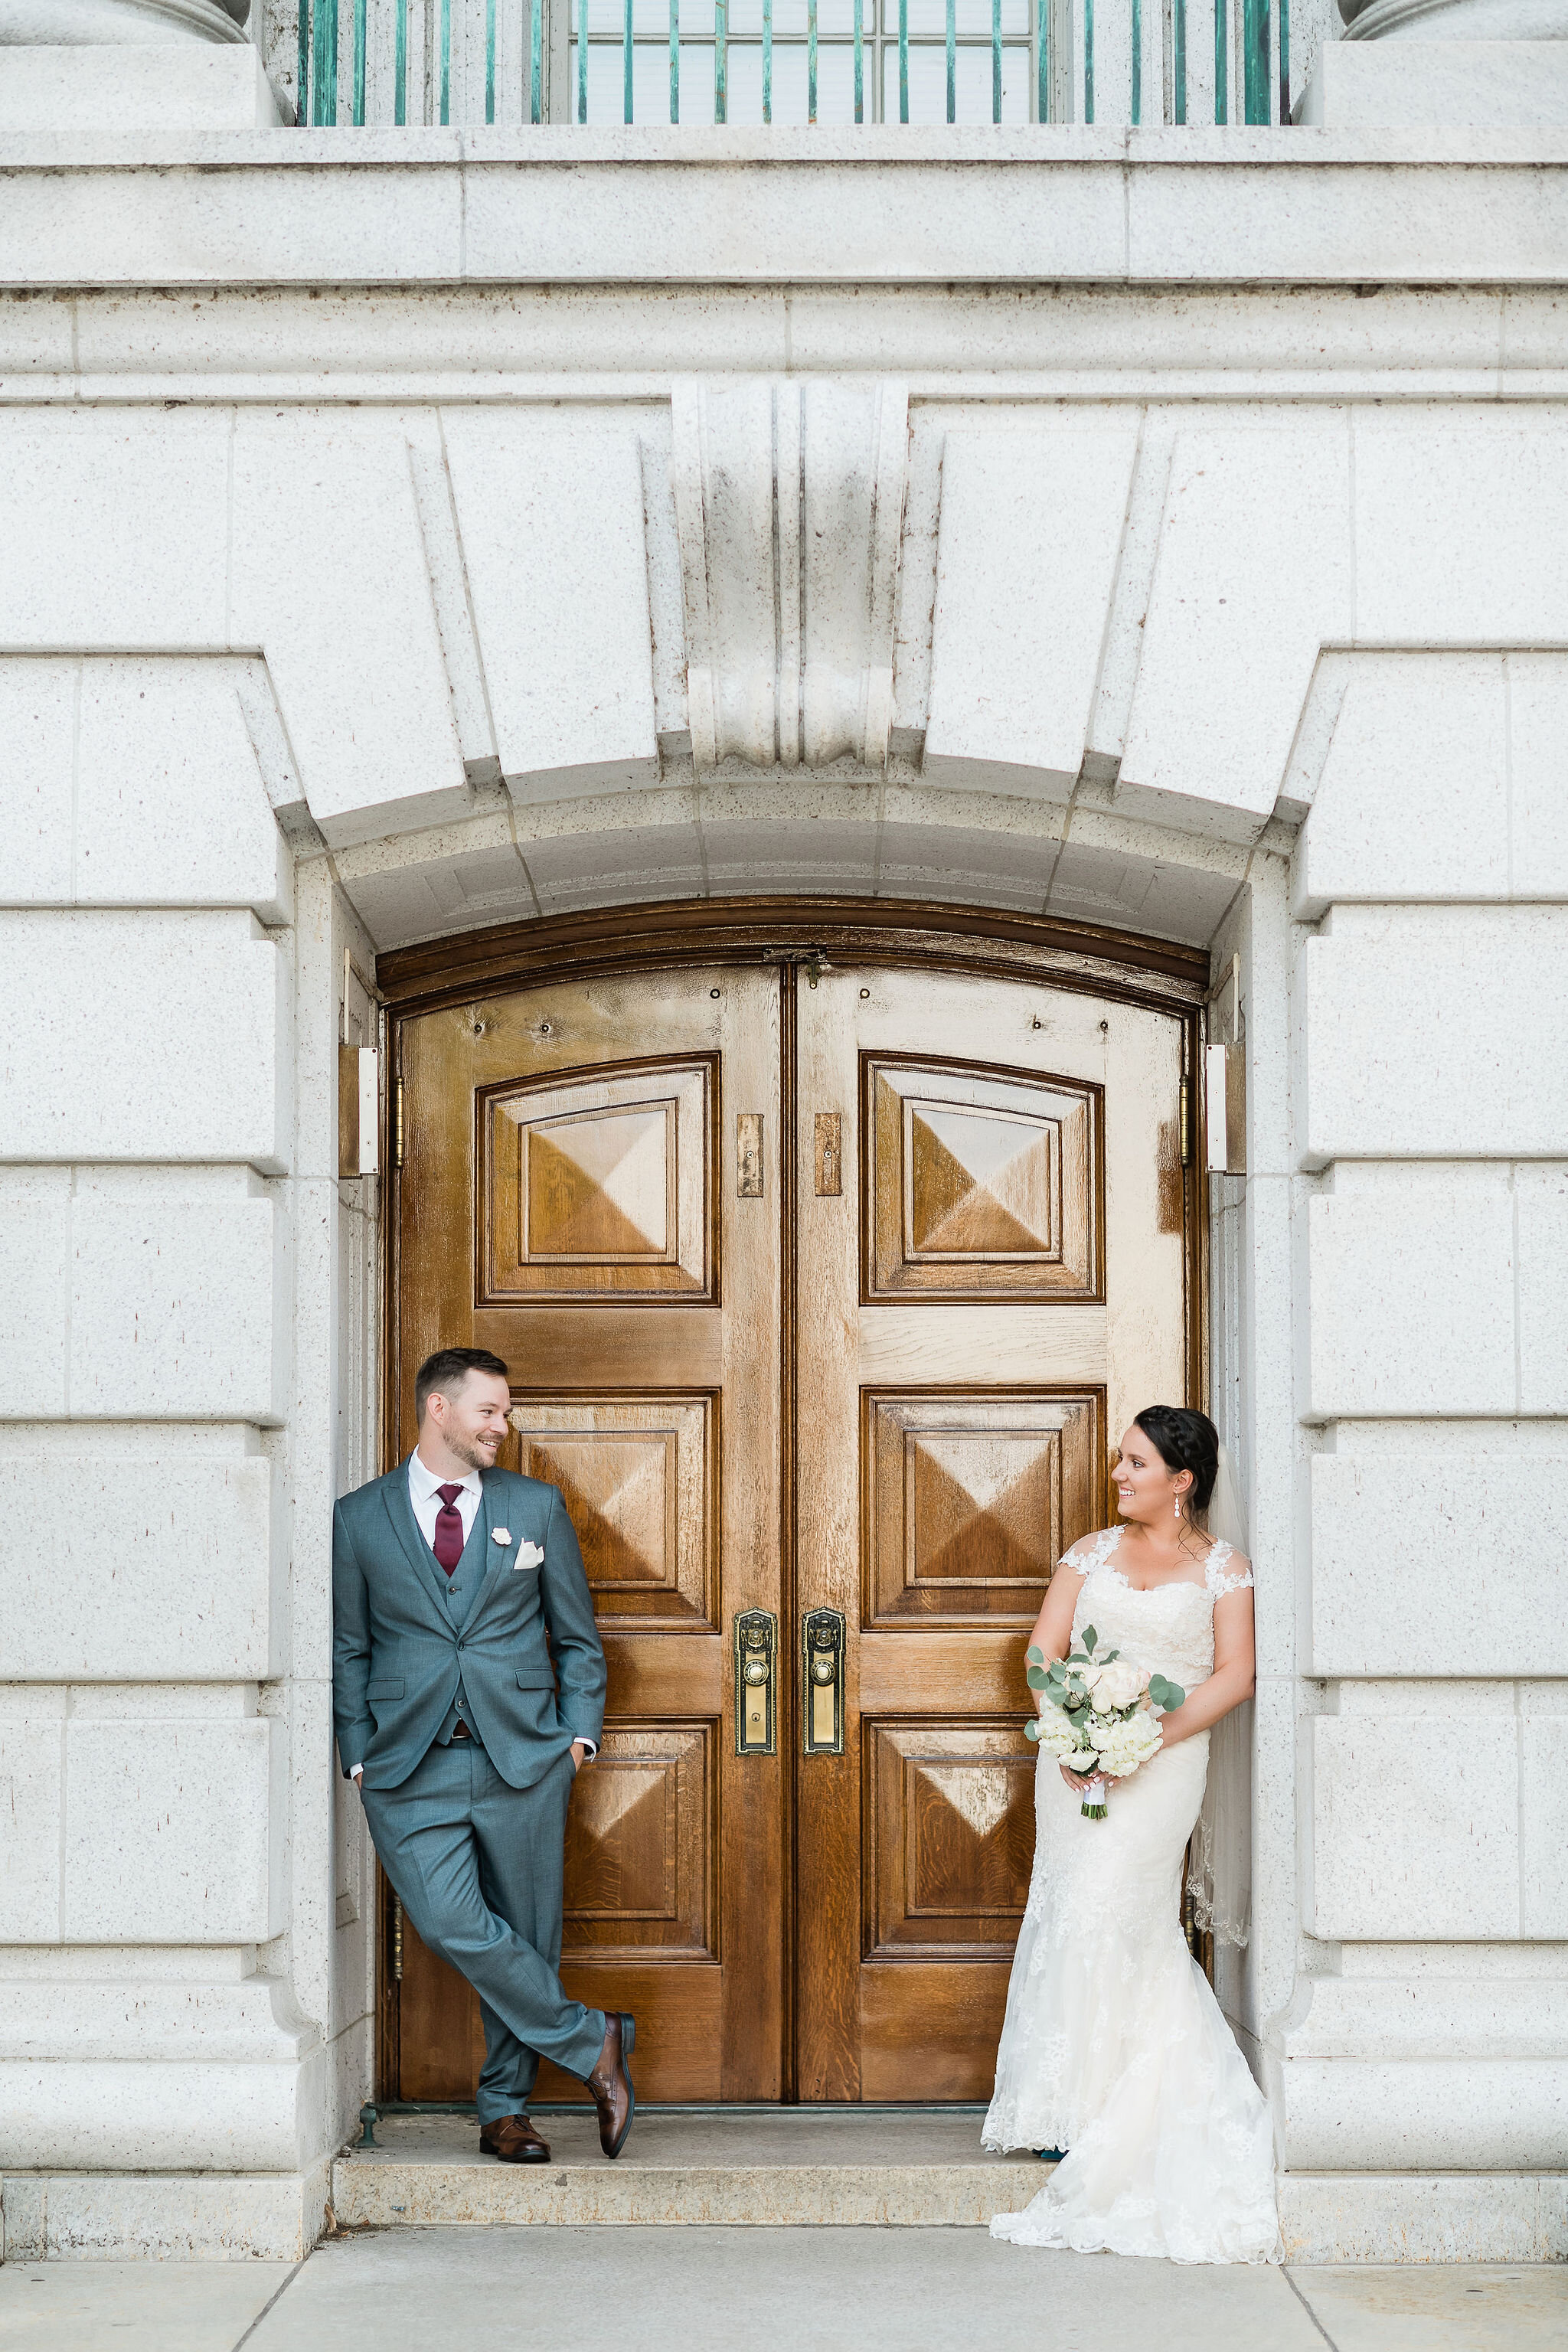 Bride and groom in a doorway looking at each other